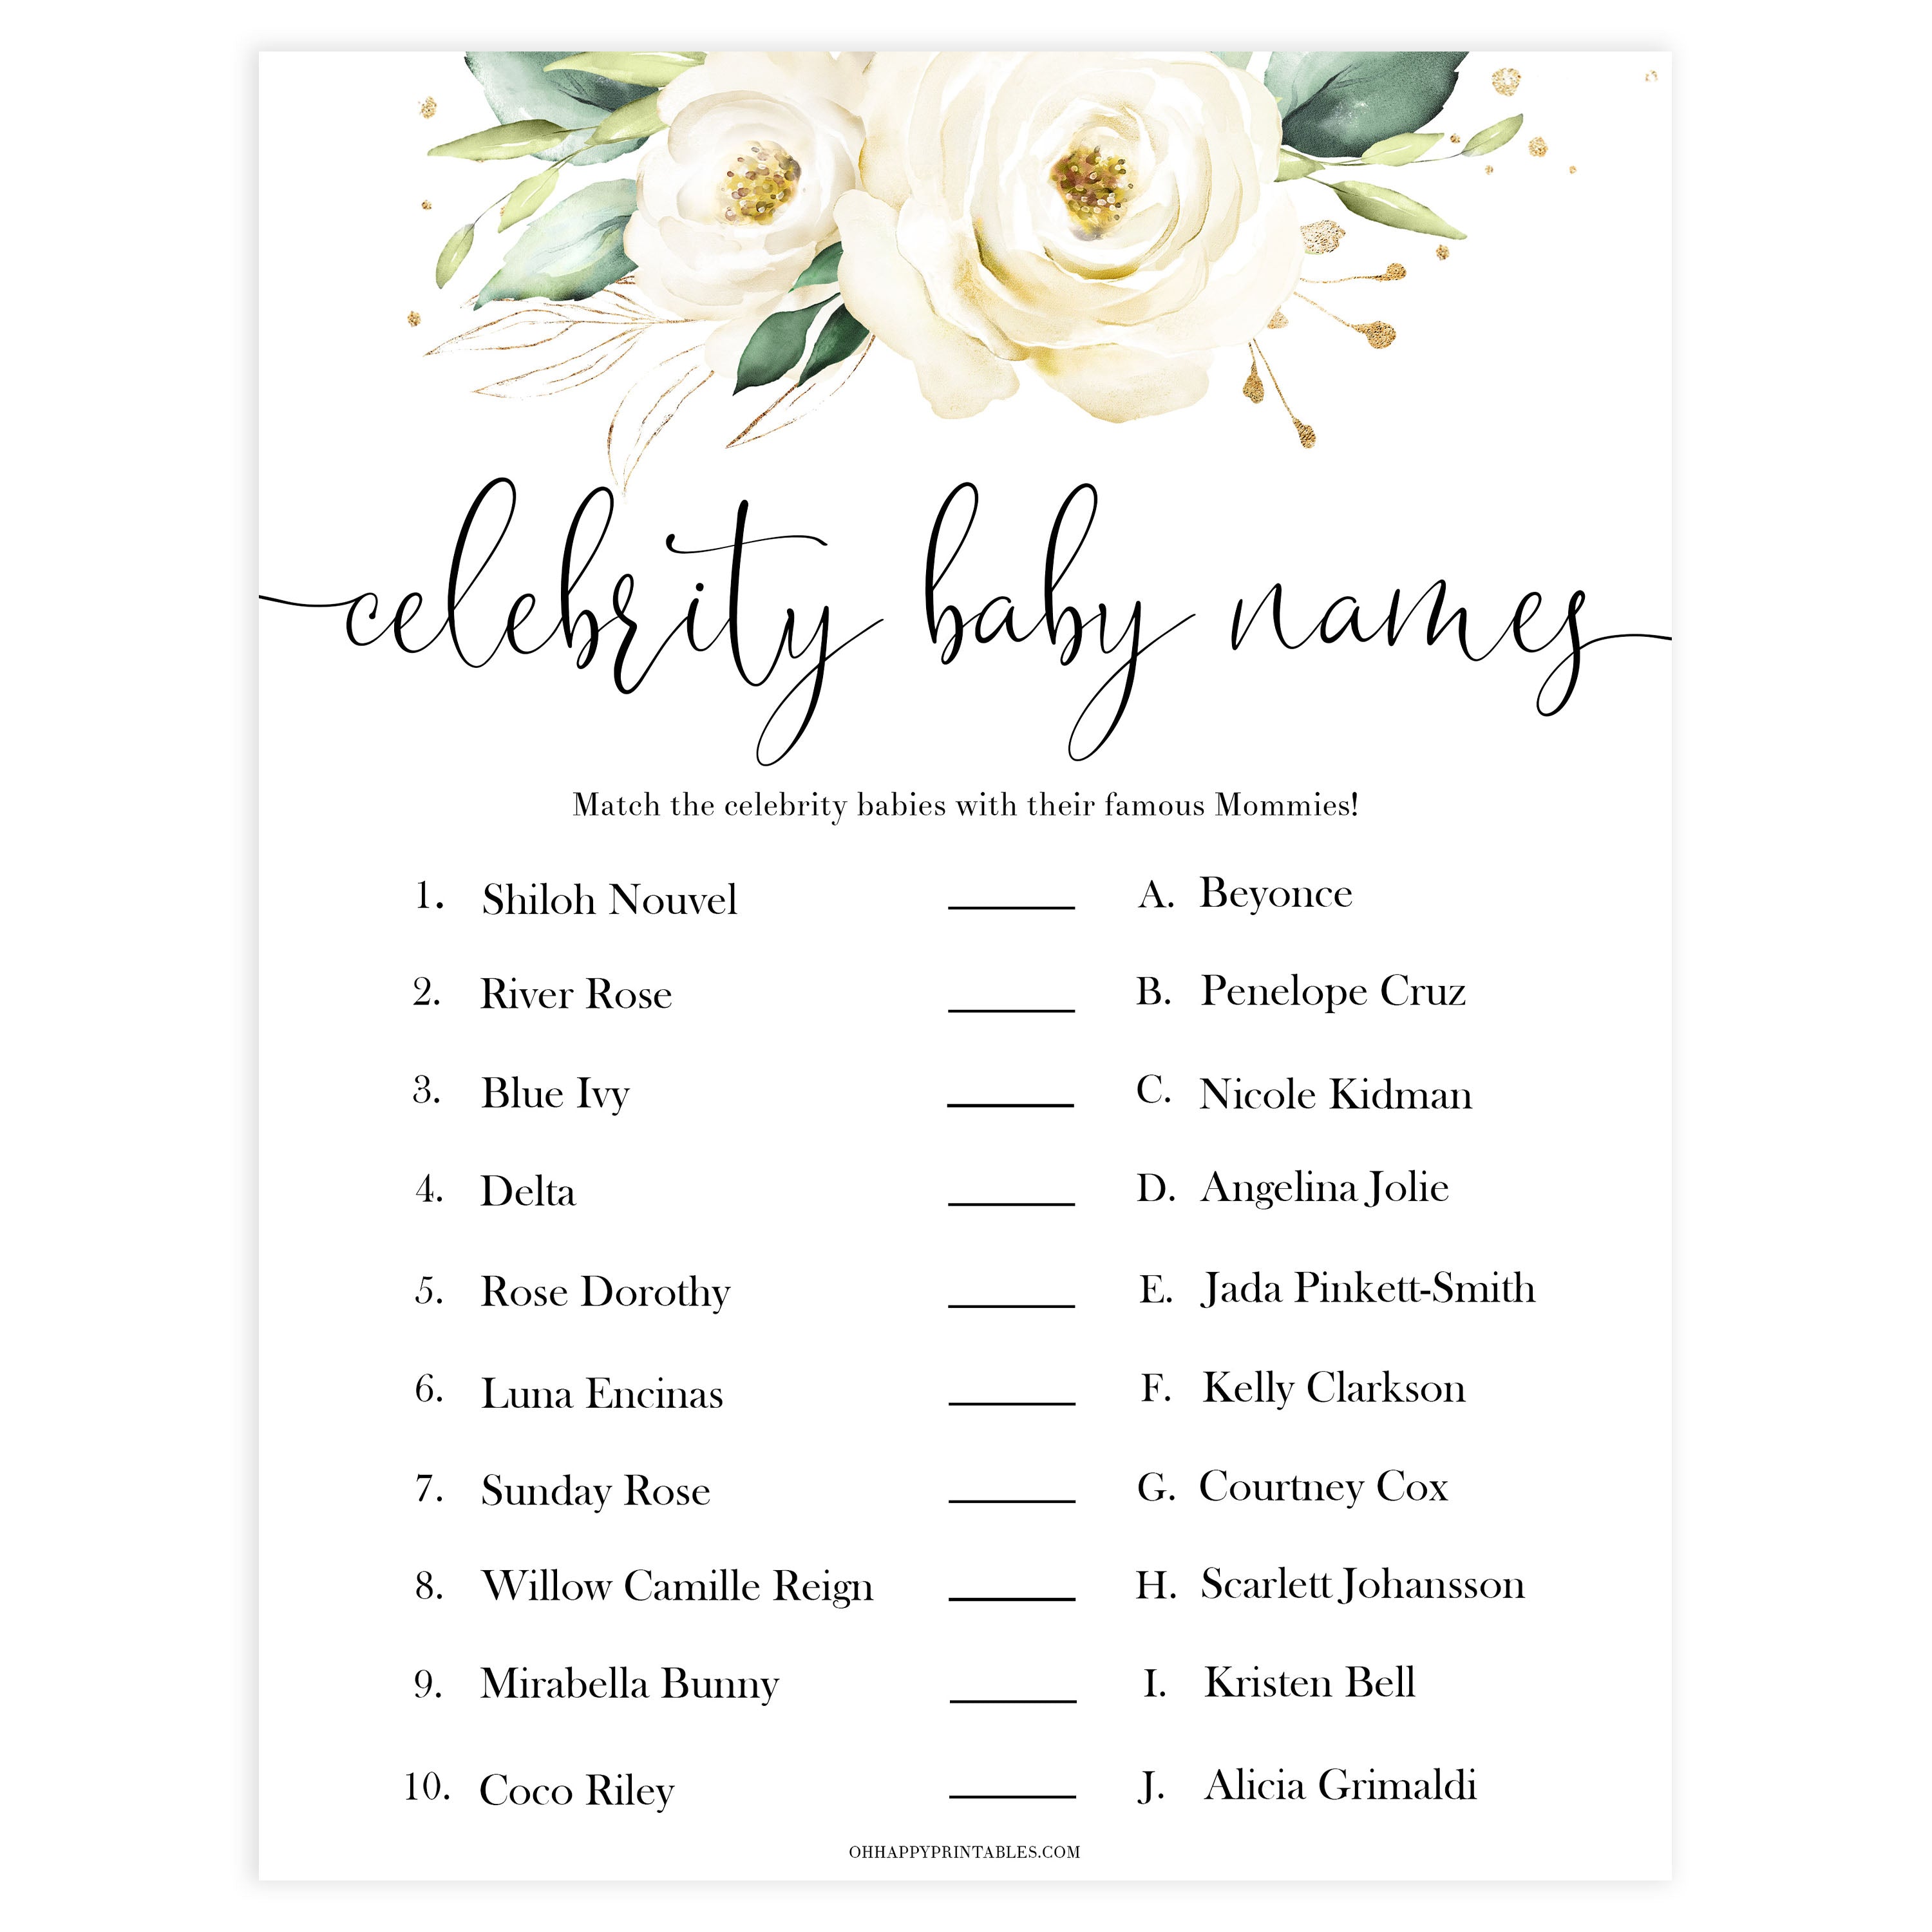 celebrity baby names game, Printable baby shower games, shite floral baby games, baby shower games, fun baby shower ideas, top baby shower ideas, floral baby shower, baby shower games, fun floral baby shower ideas